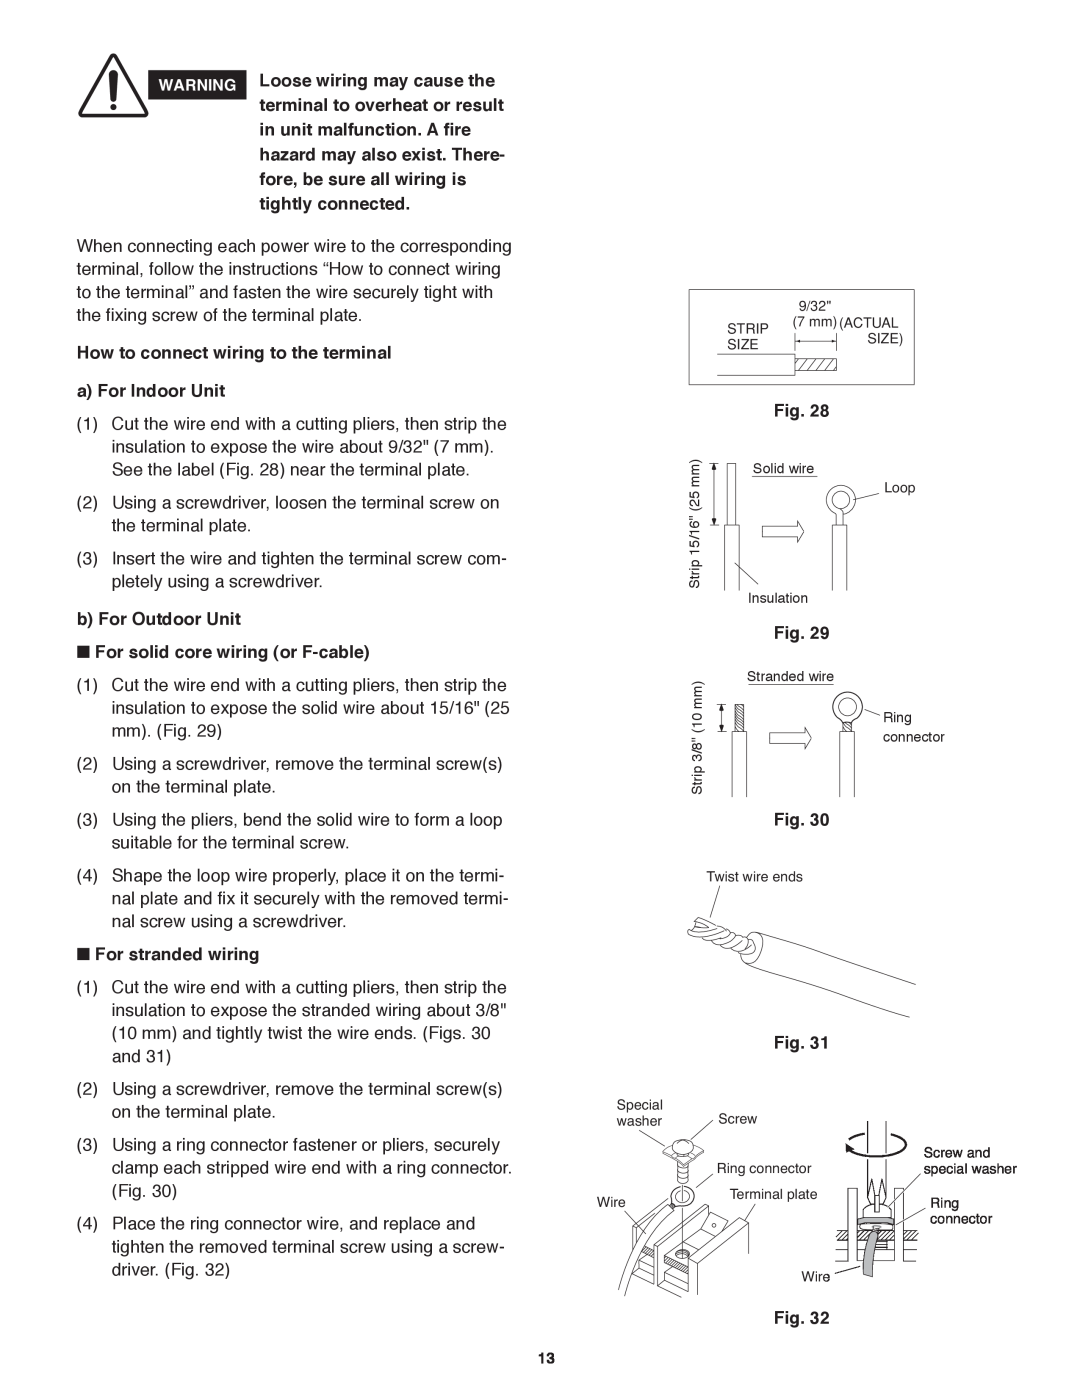 Panasonic CS-MKE9NB4U How to connect wiring to the terminal, a For Indoor Unit, b For Outdoor Unit, For stranded wiring 